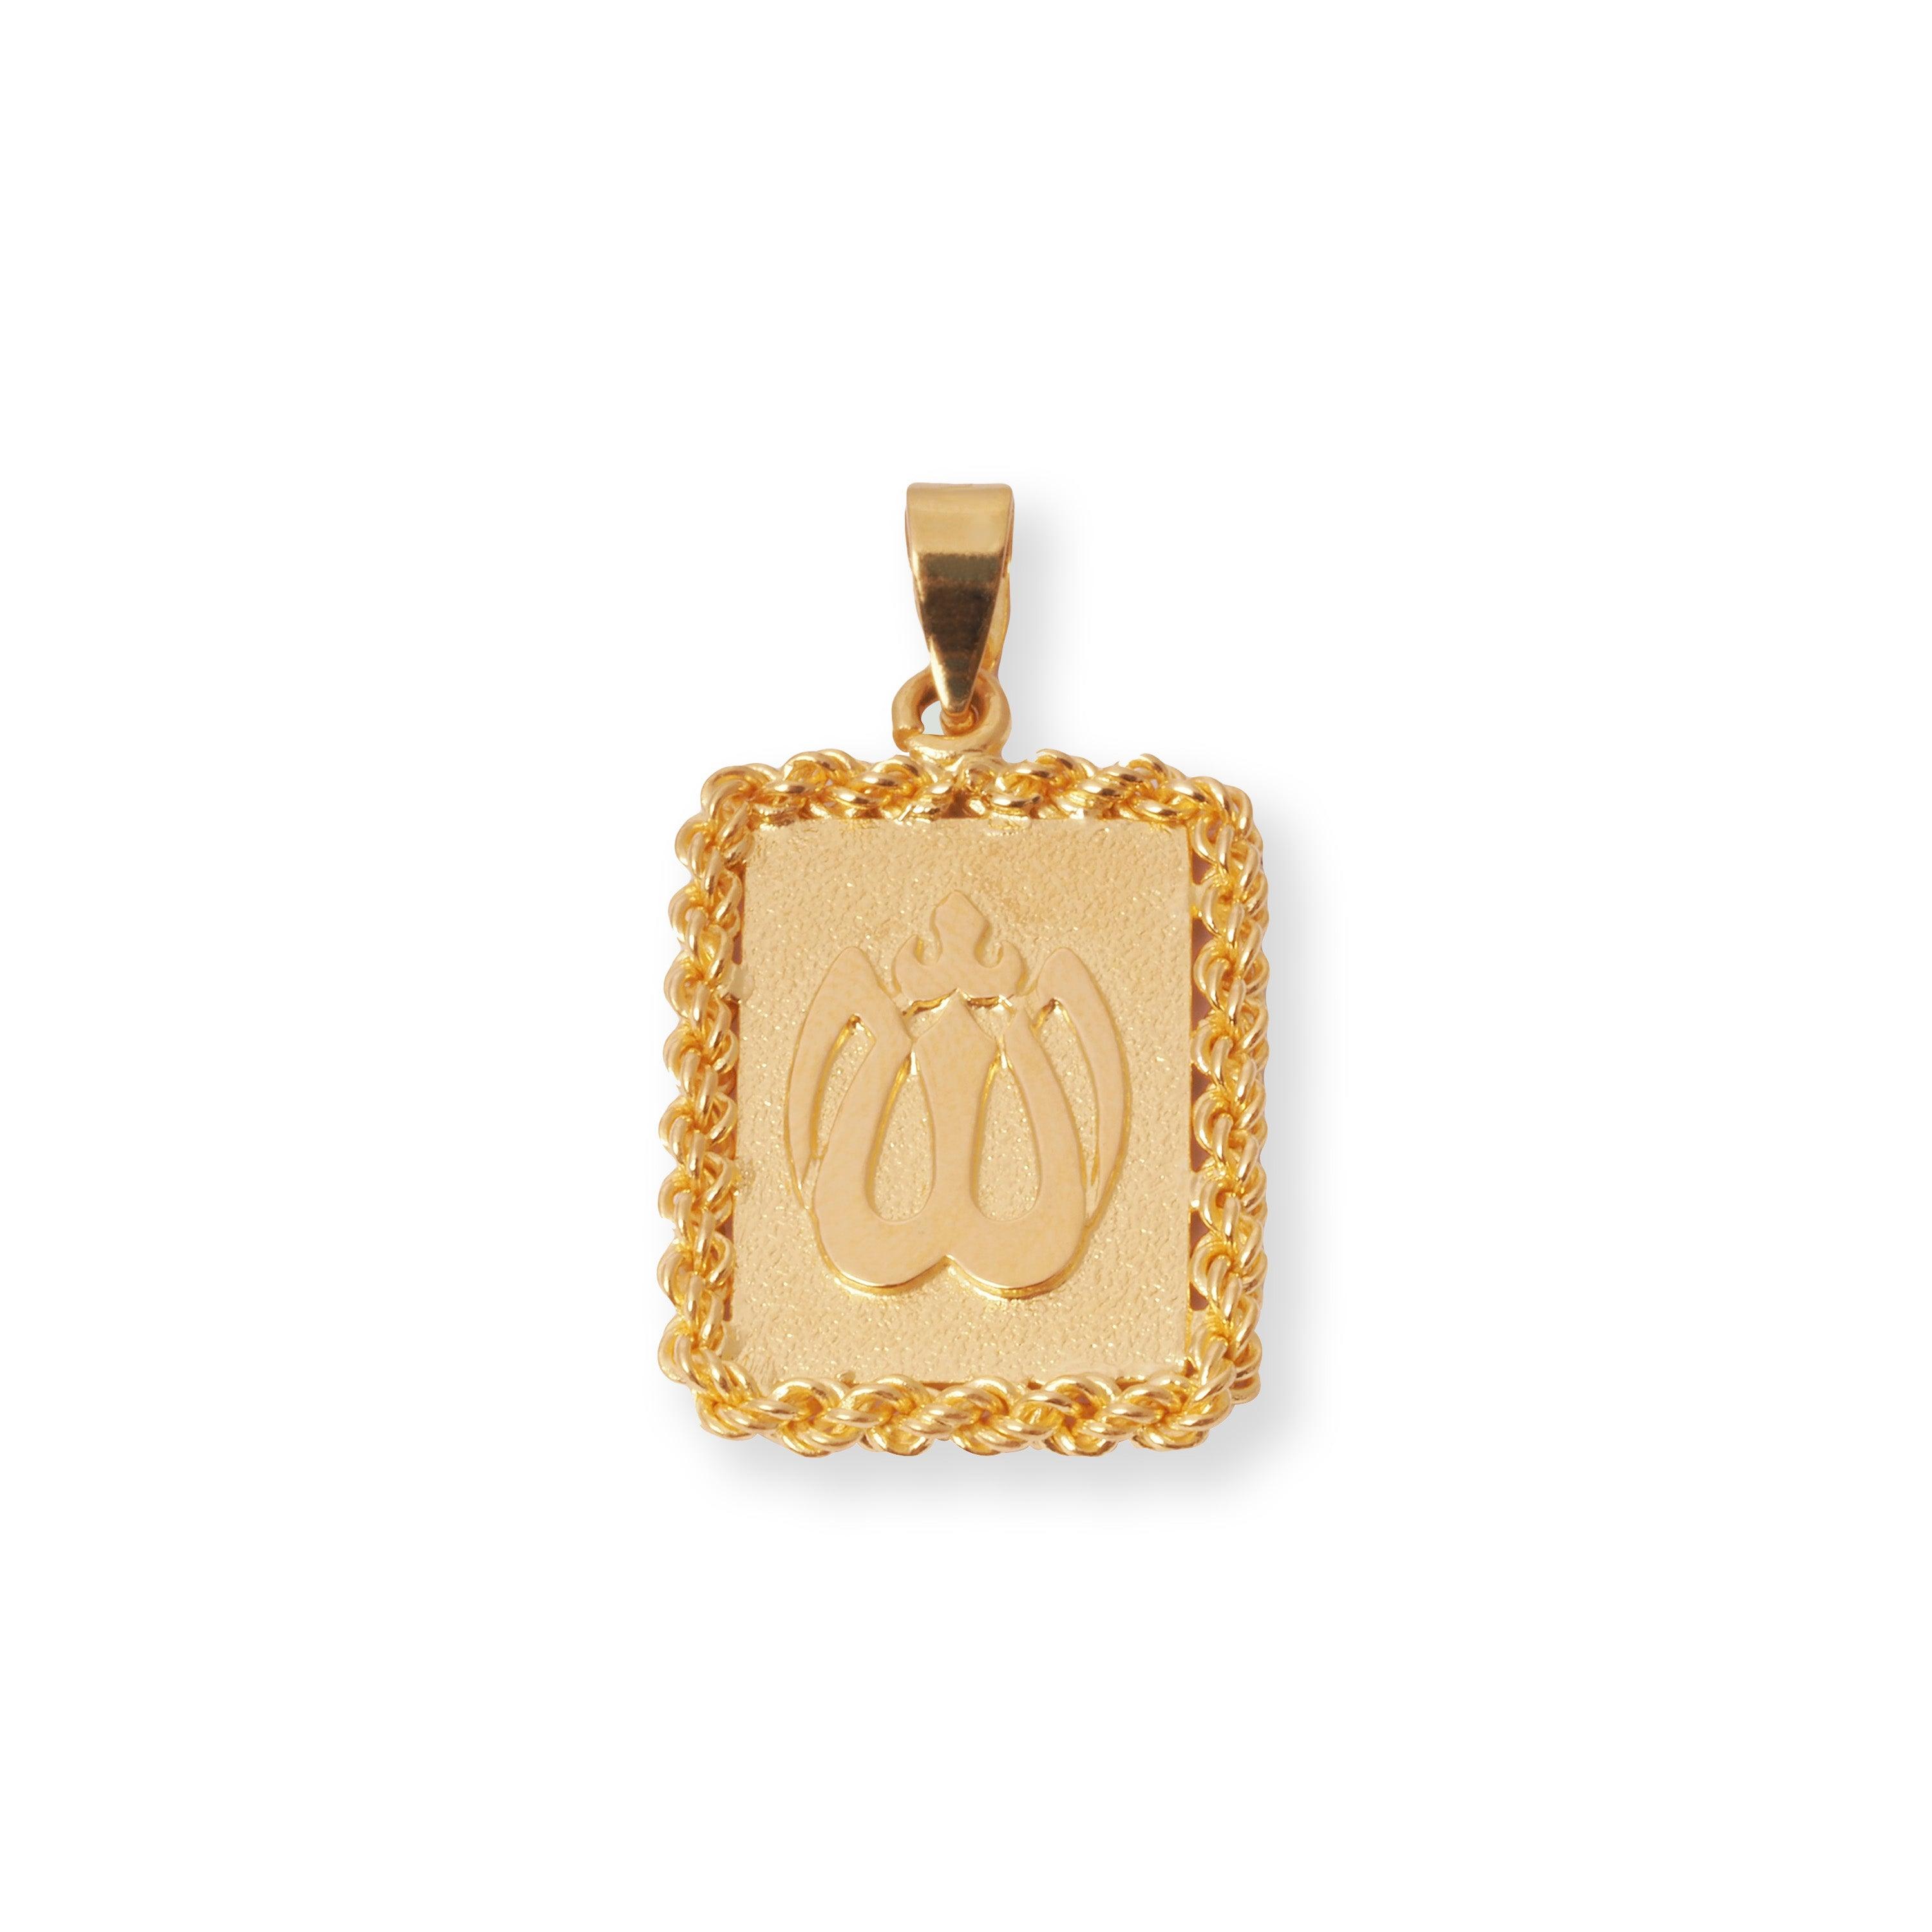 22ct Yellow Gold Islamic Allah Pendant with Rope Chain Borders P-7988 - Minar Jewellers